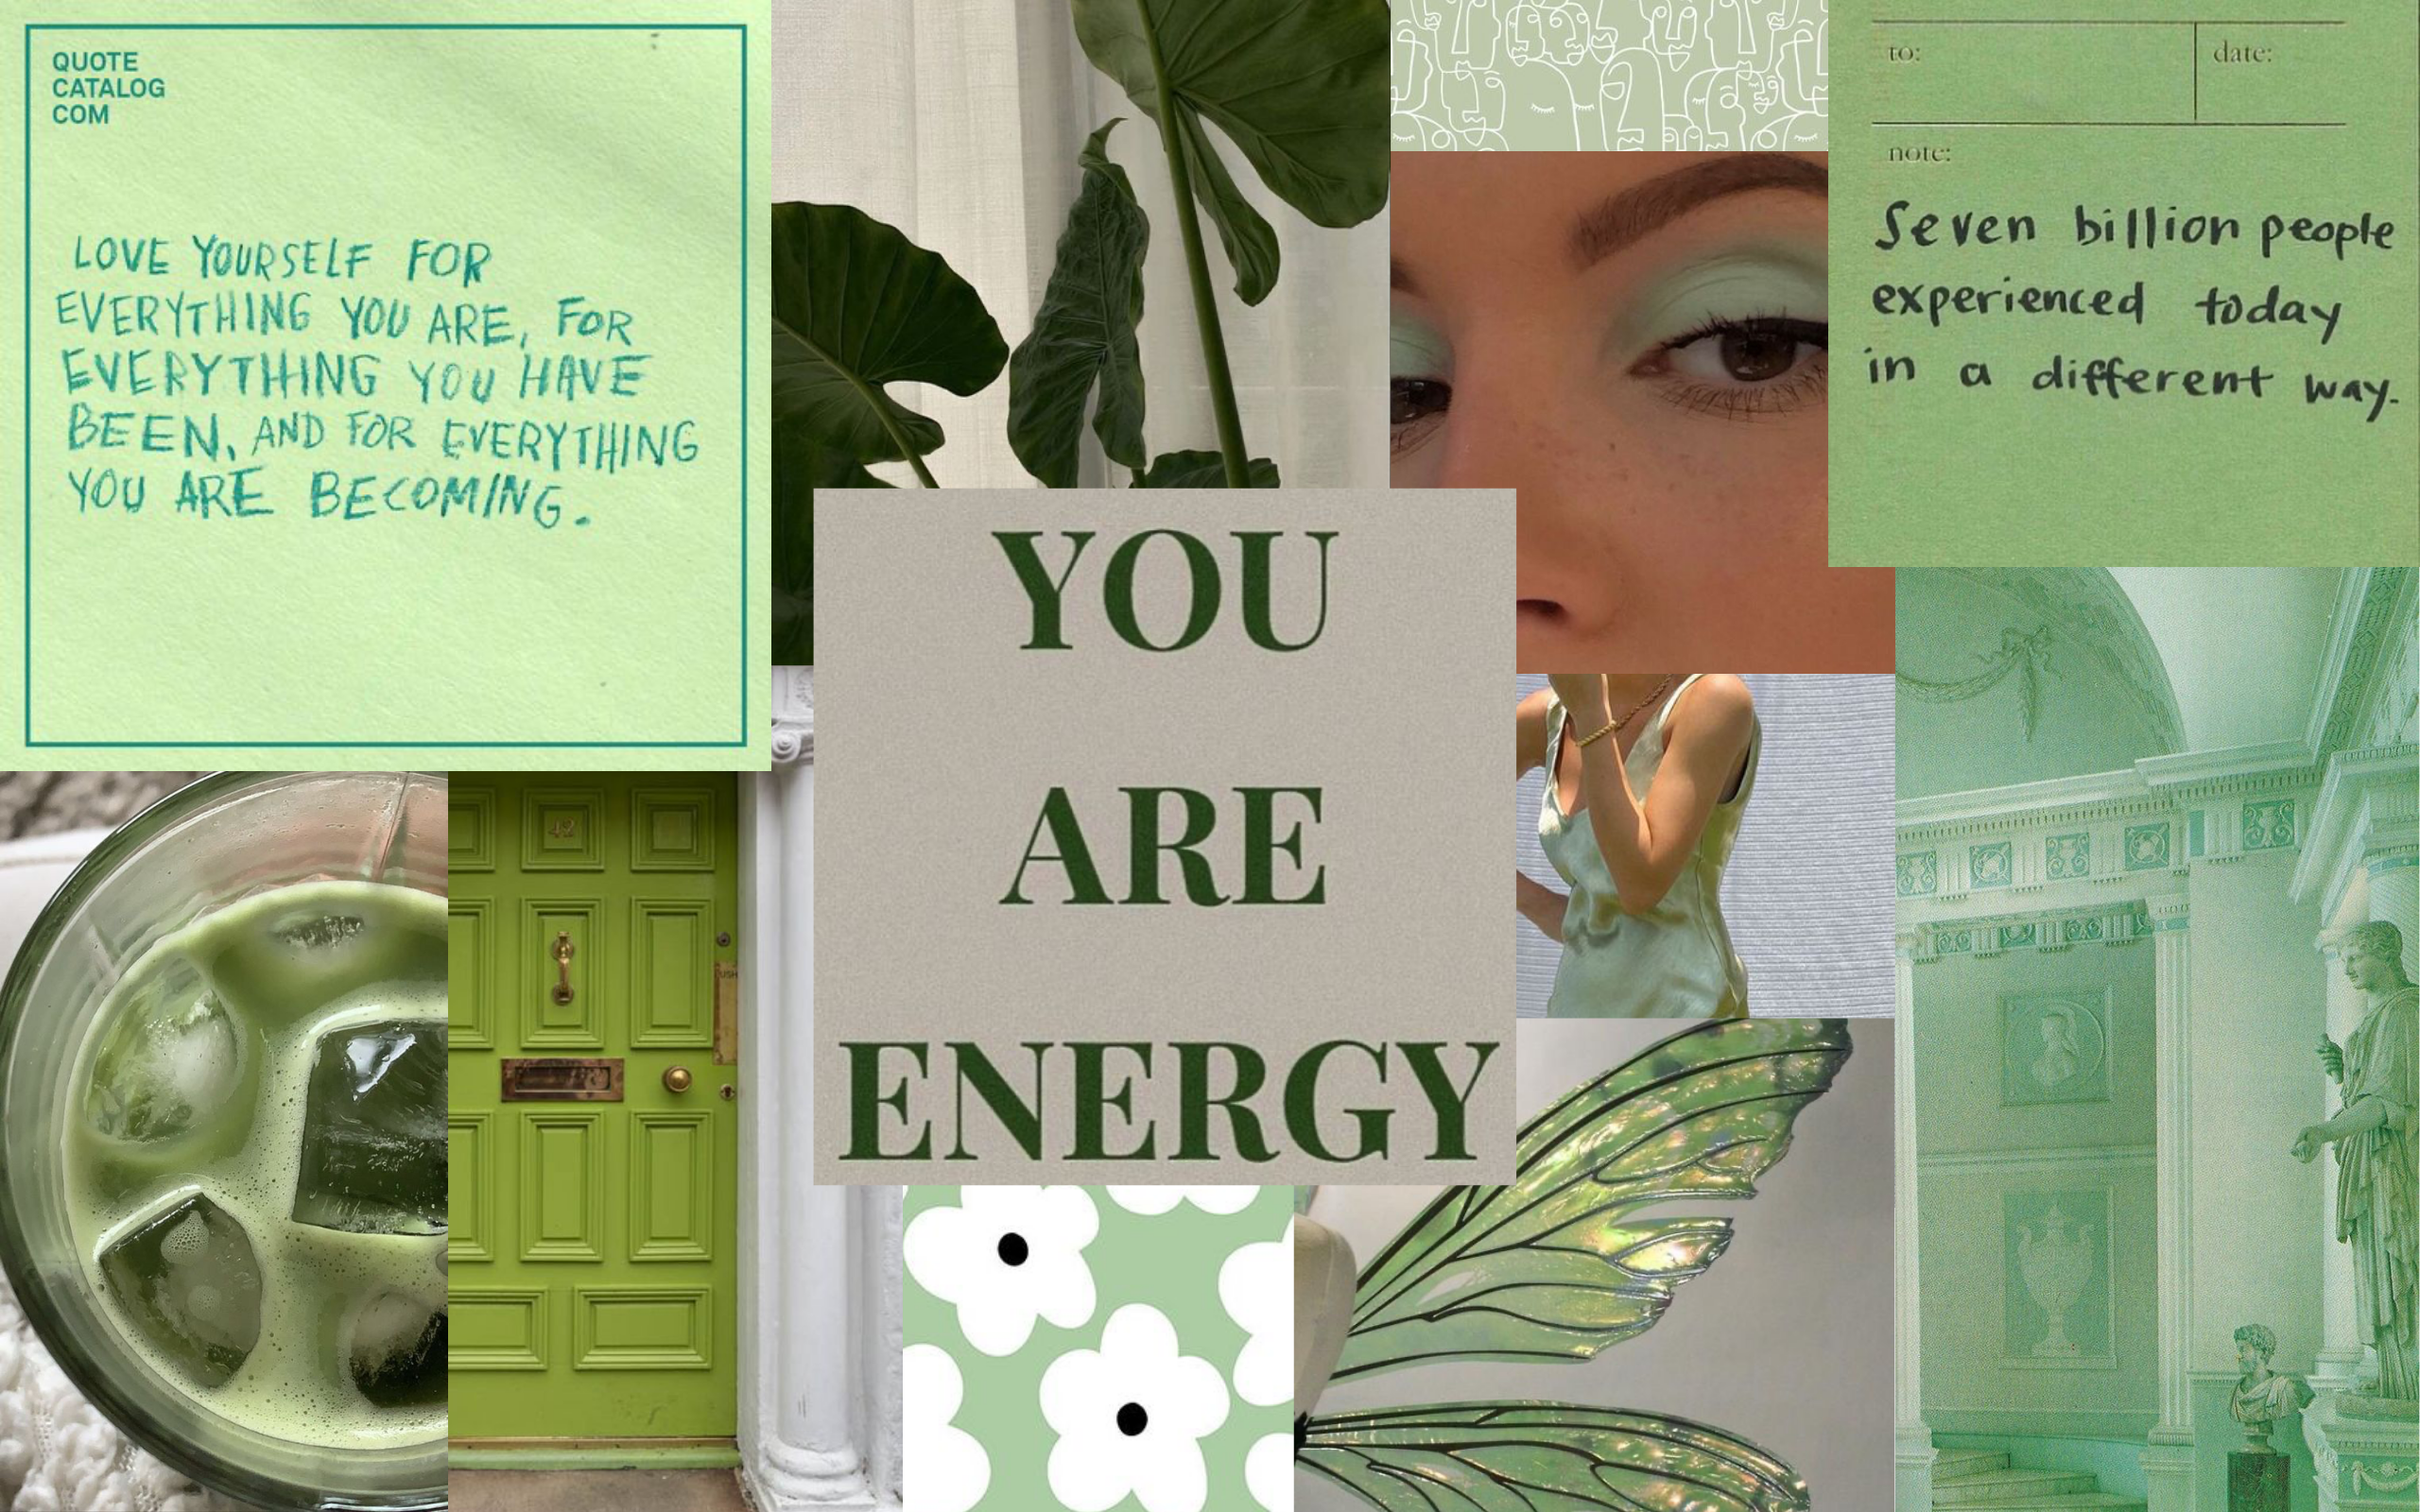 Sage green MacBook collage wallpaper. Collage book, Quote catalog, Wallpaper